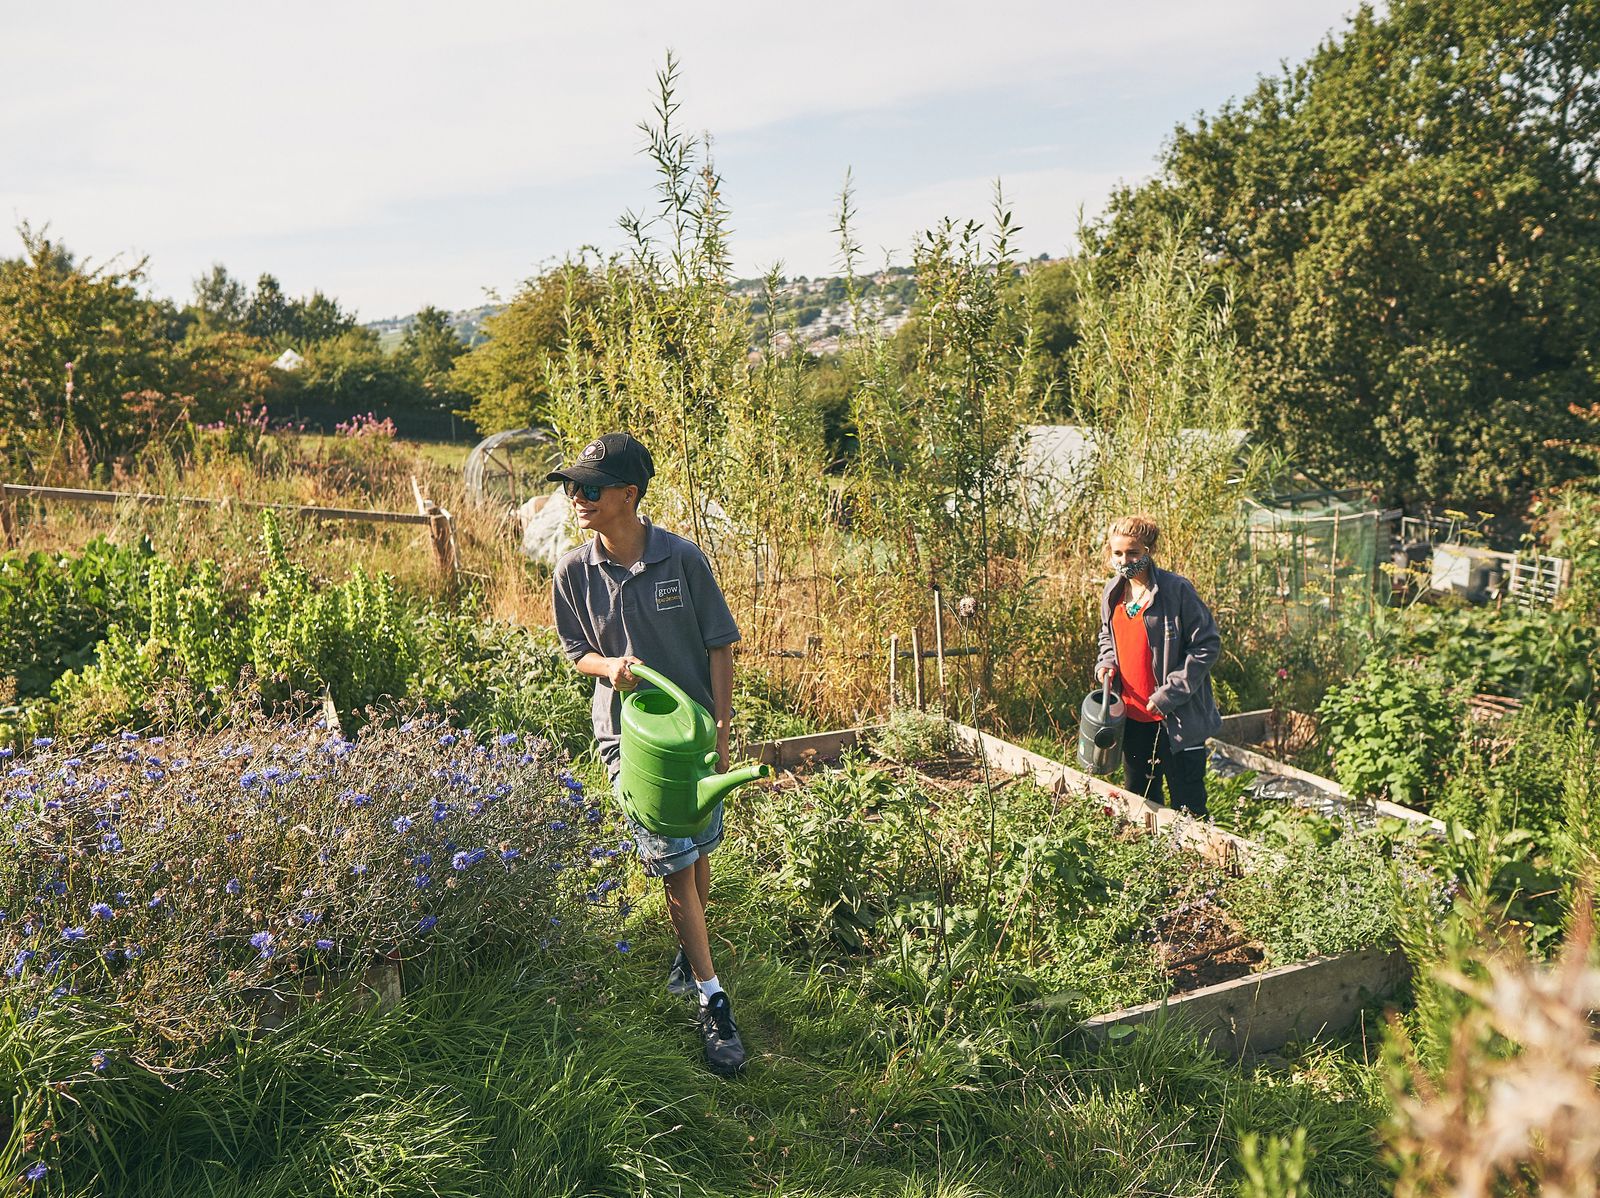 Sheffield gardening charity partners with the Royal Horticultural Society (RHS)